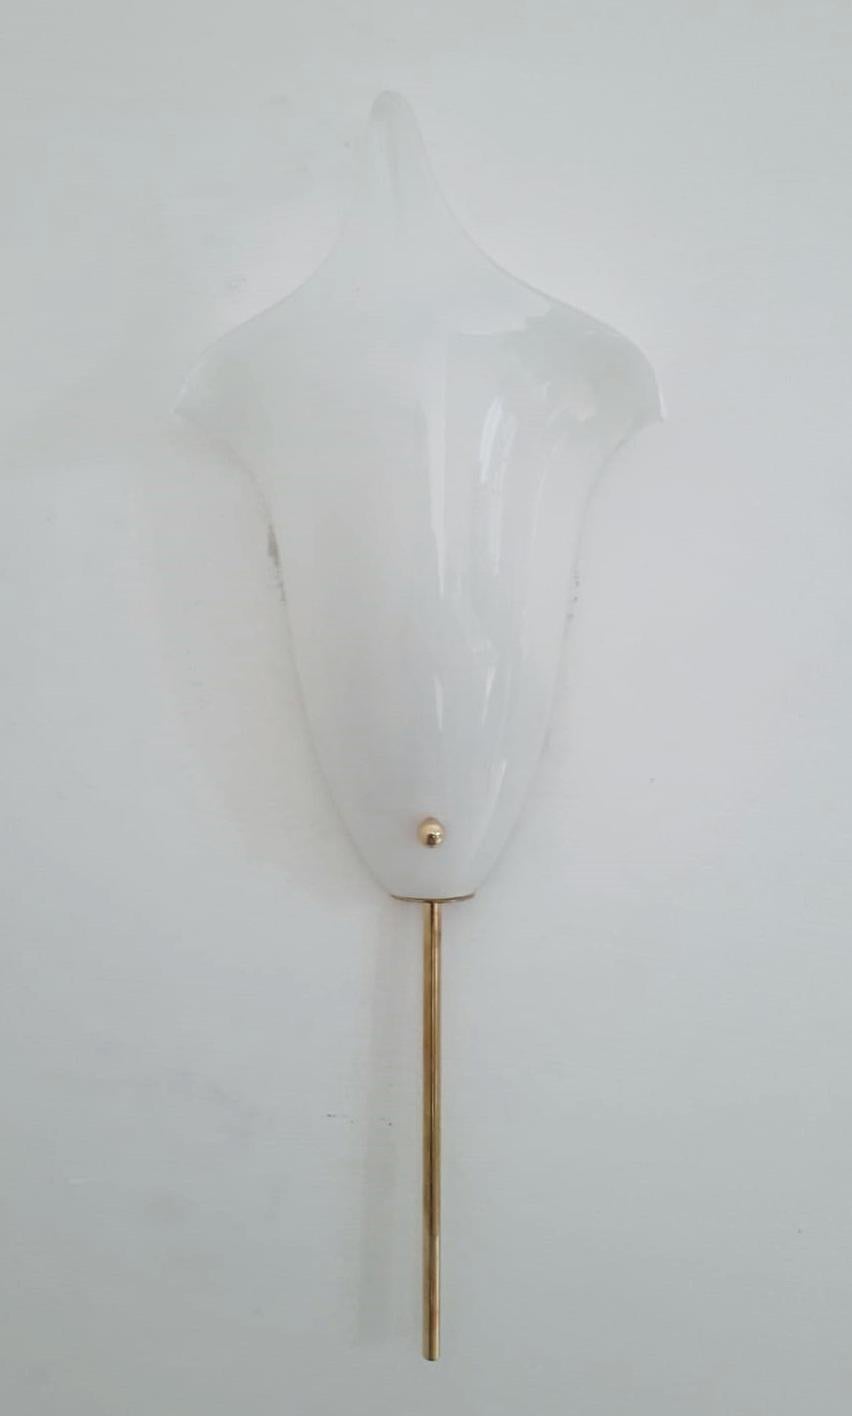 Vintage Italian wall lights with milky white tulip shaped Murano glass shades mounted on brass frames, made in Italy by Barovier e Toso, circa 1950s
Original mark on frame
Measures: height 21 inches, width 8 inches, depth 3 inches
1 light / E12 or